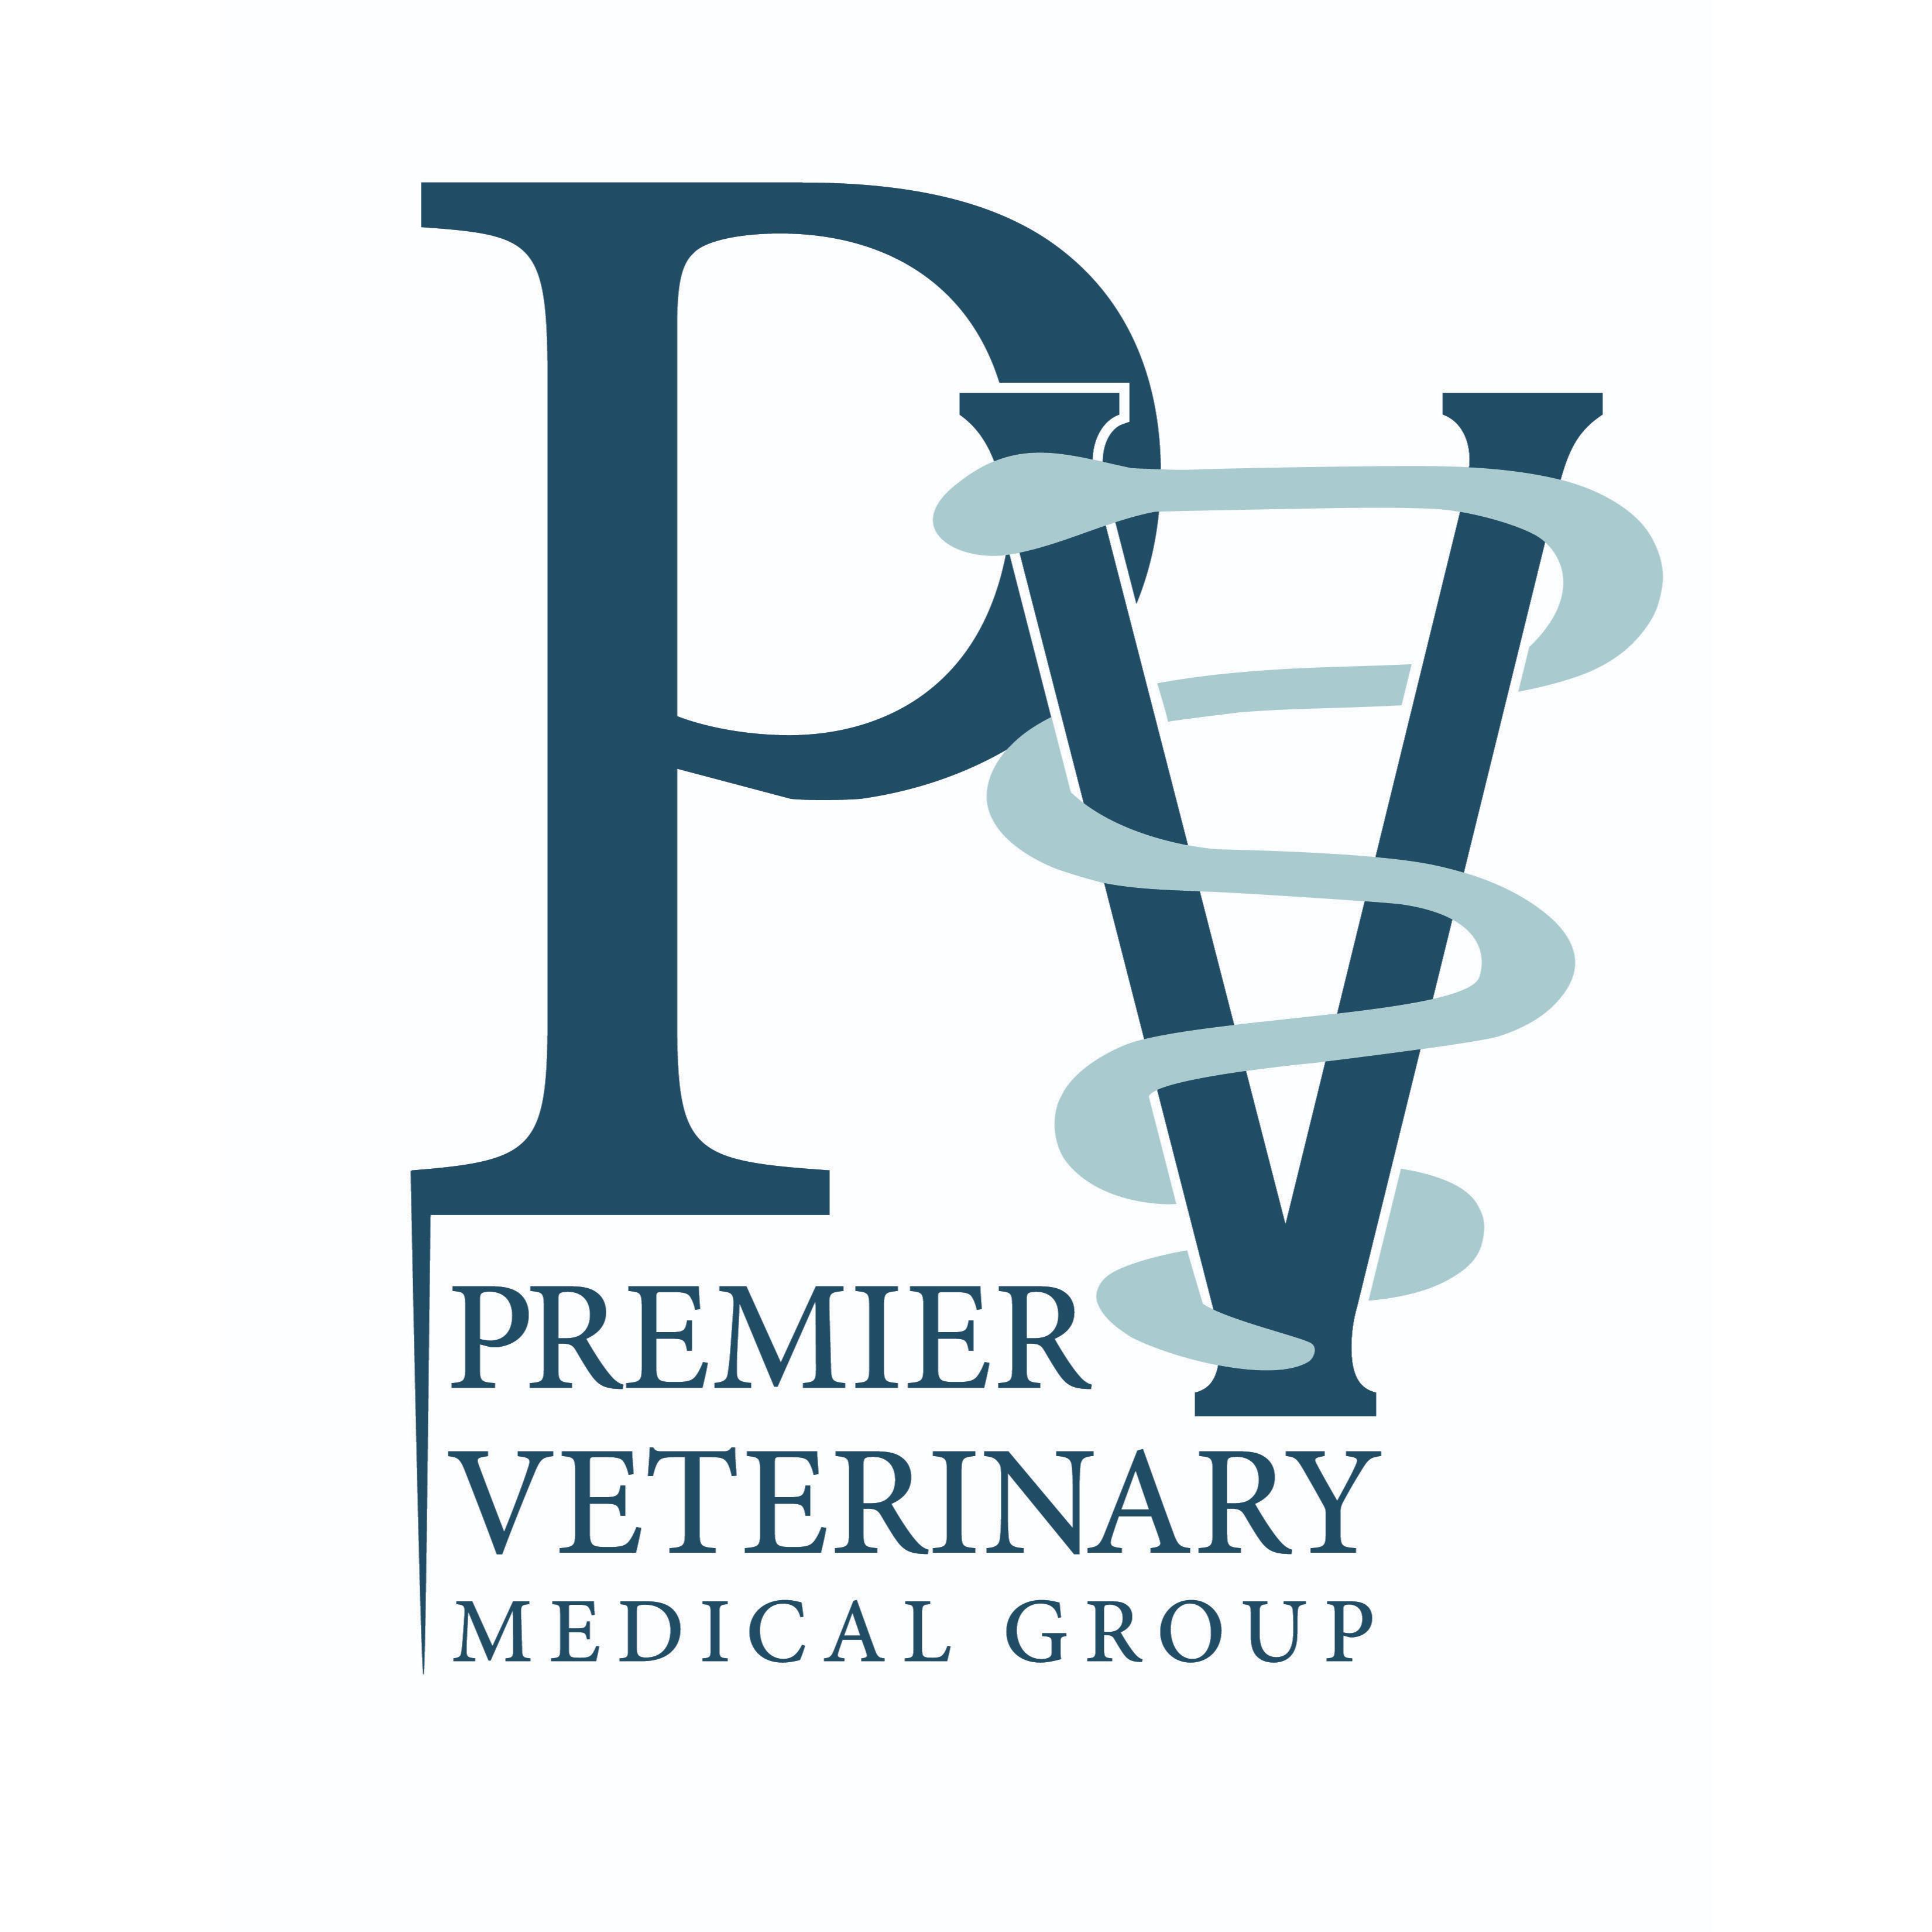 Premier Veterinary Medical Group - Forest Hills - Forest Hills, NY 11375 - (718)261-1231 | ShowMeLocal.com